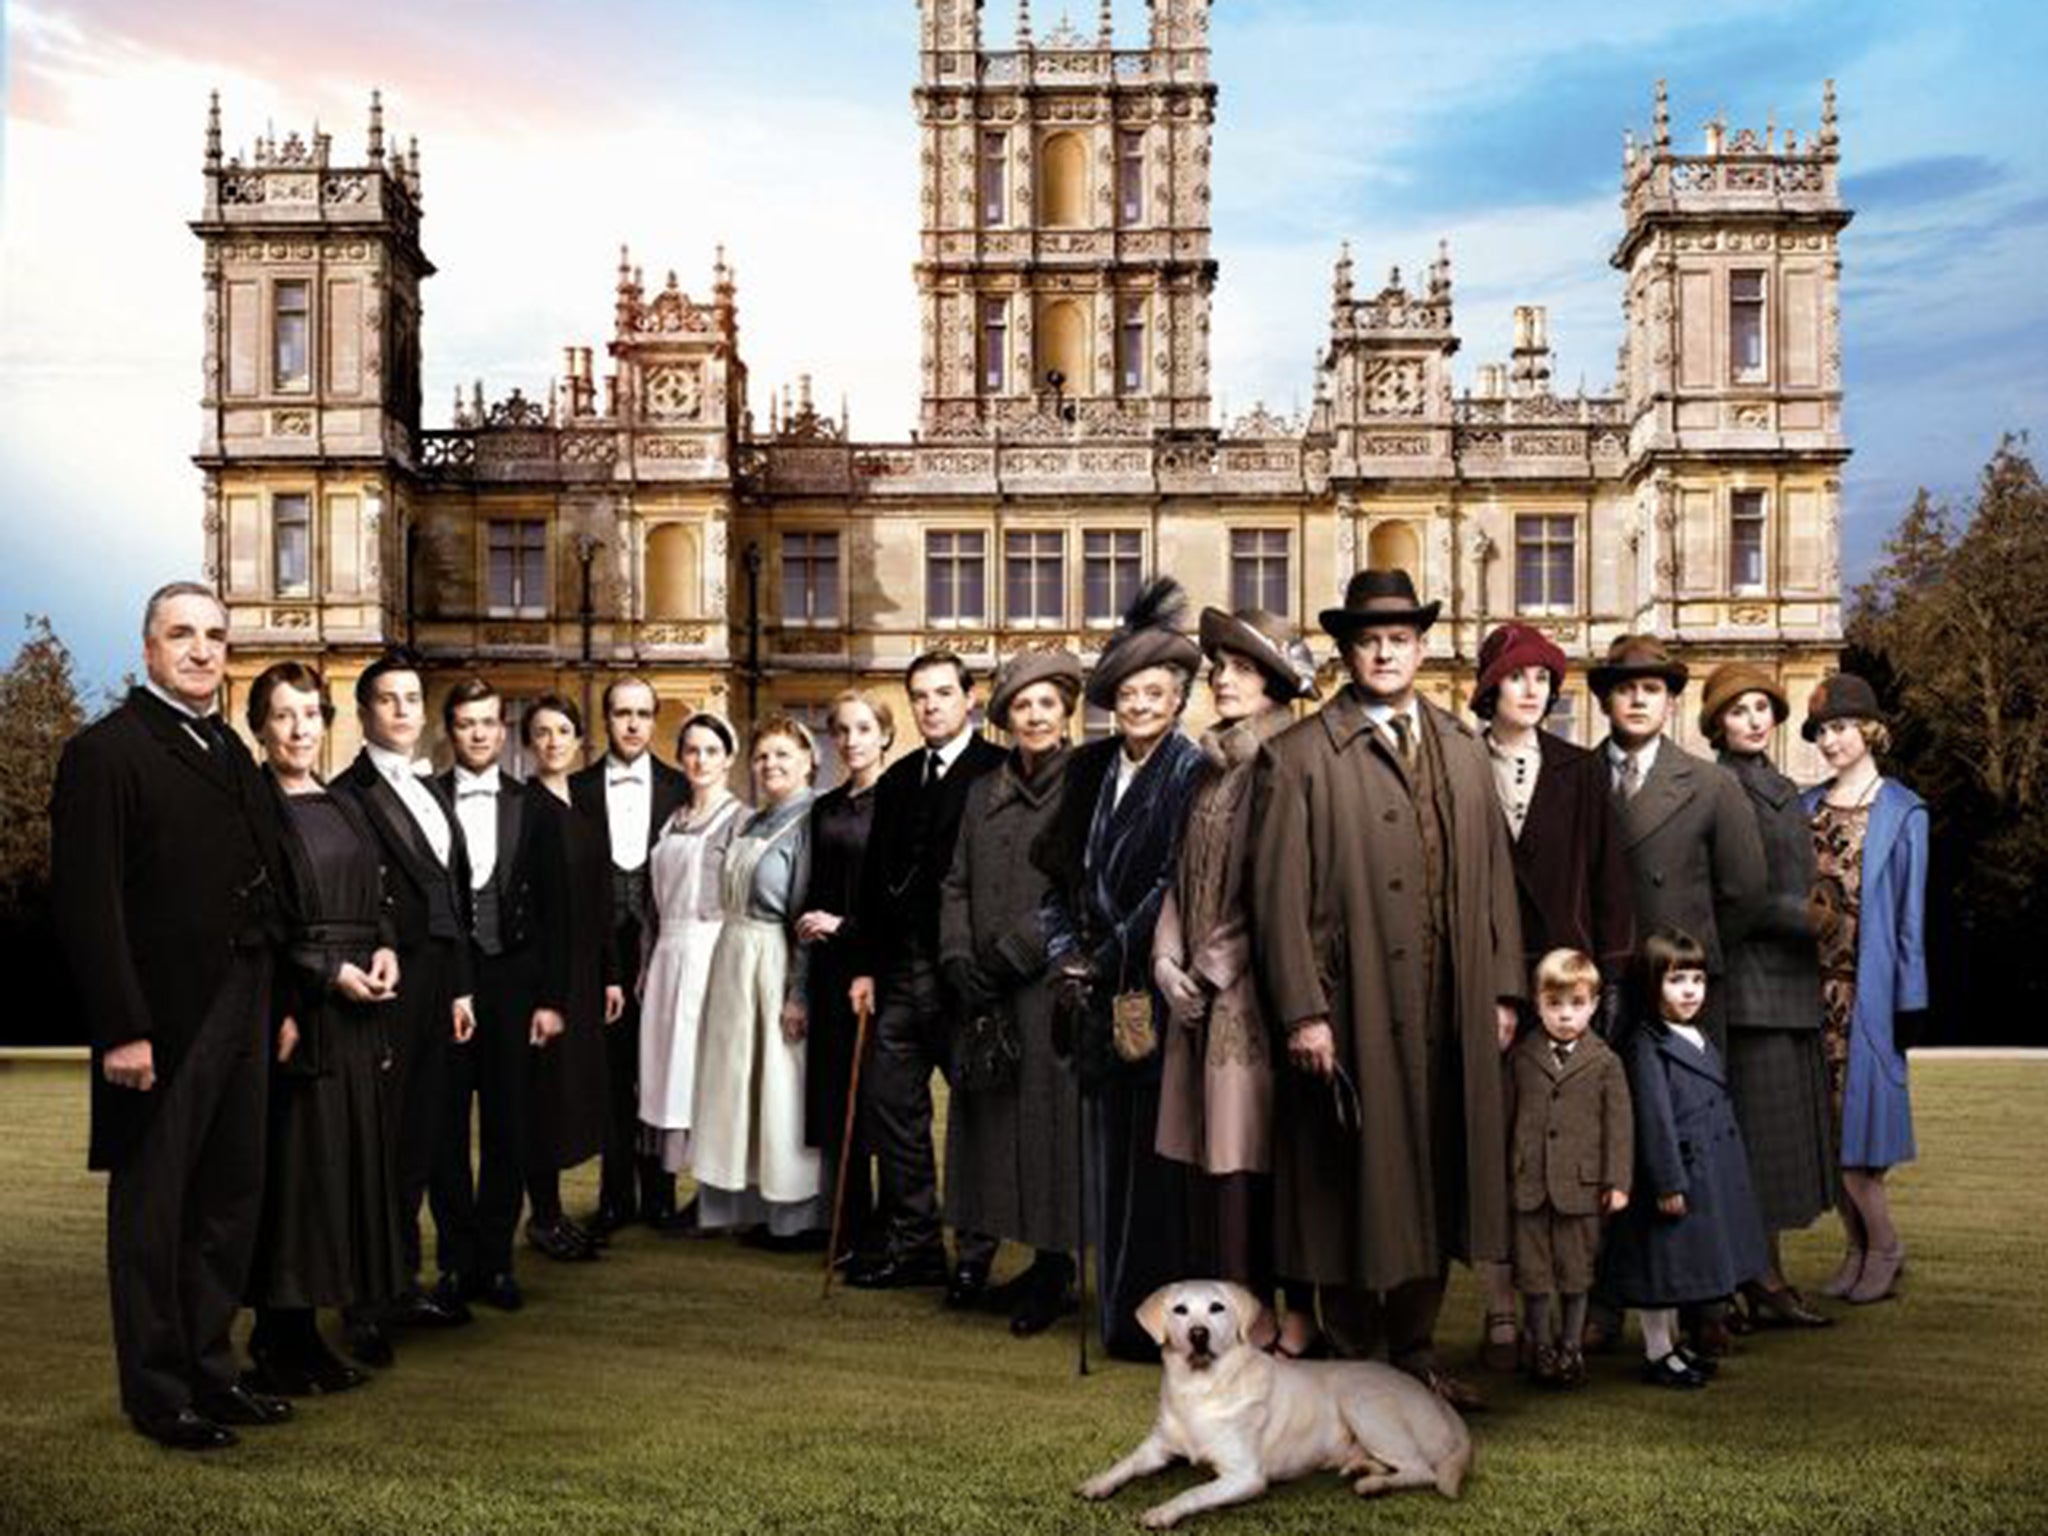 There will be a Downton Abbey Christmas special for series six